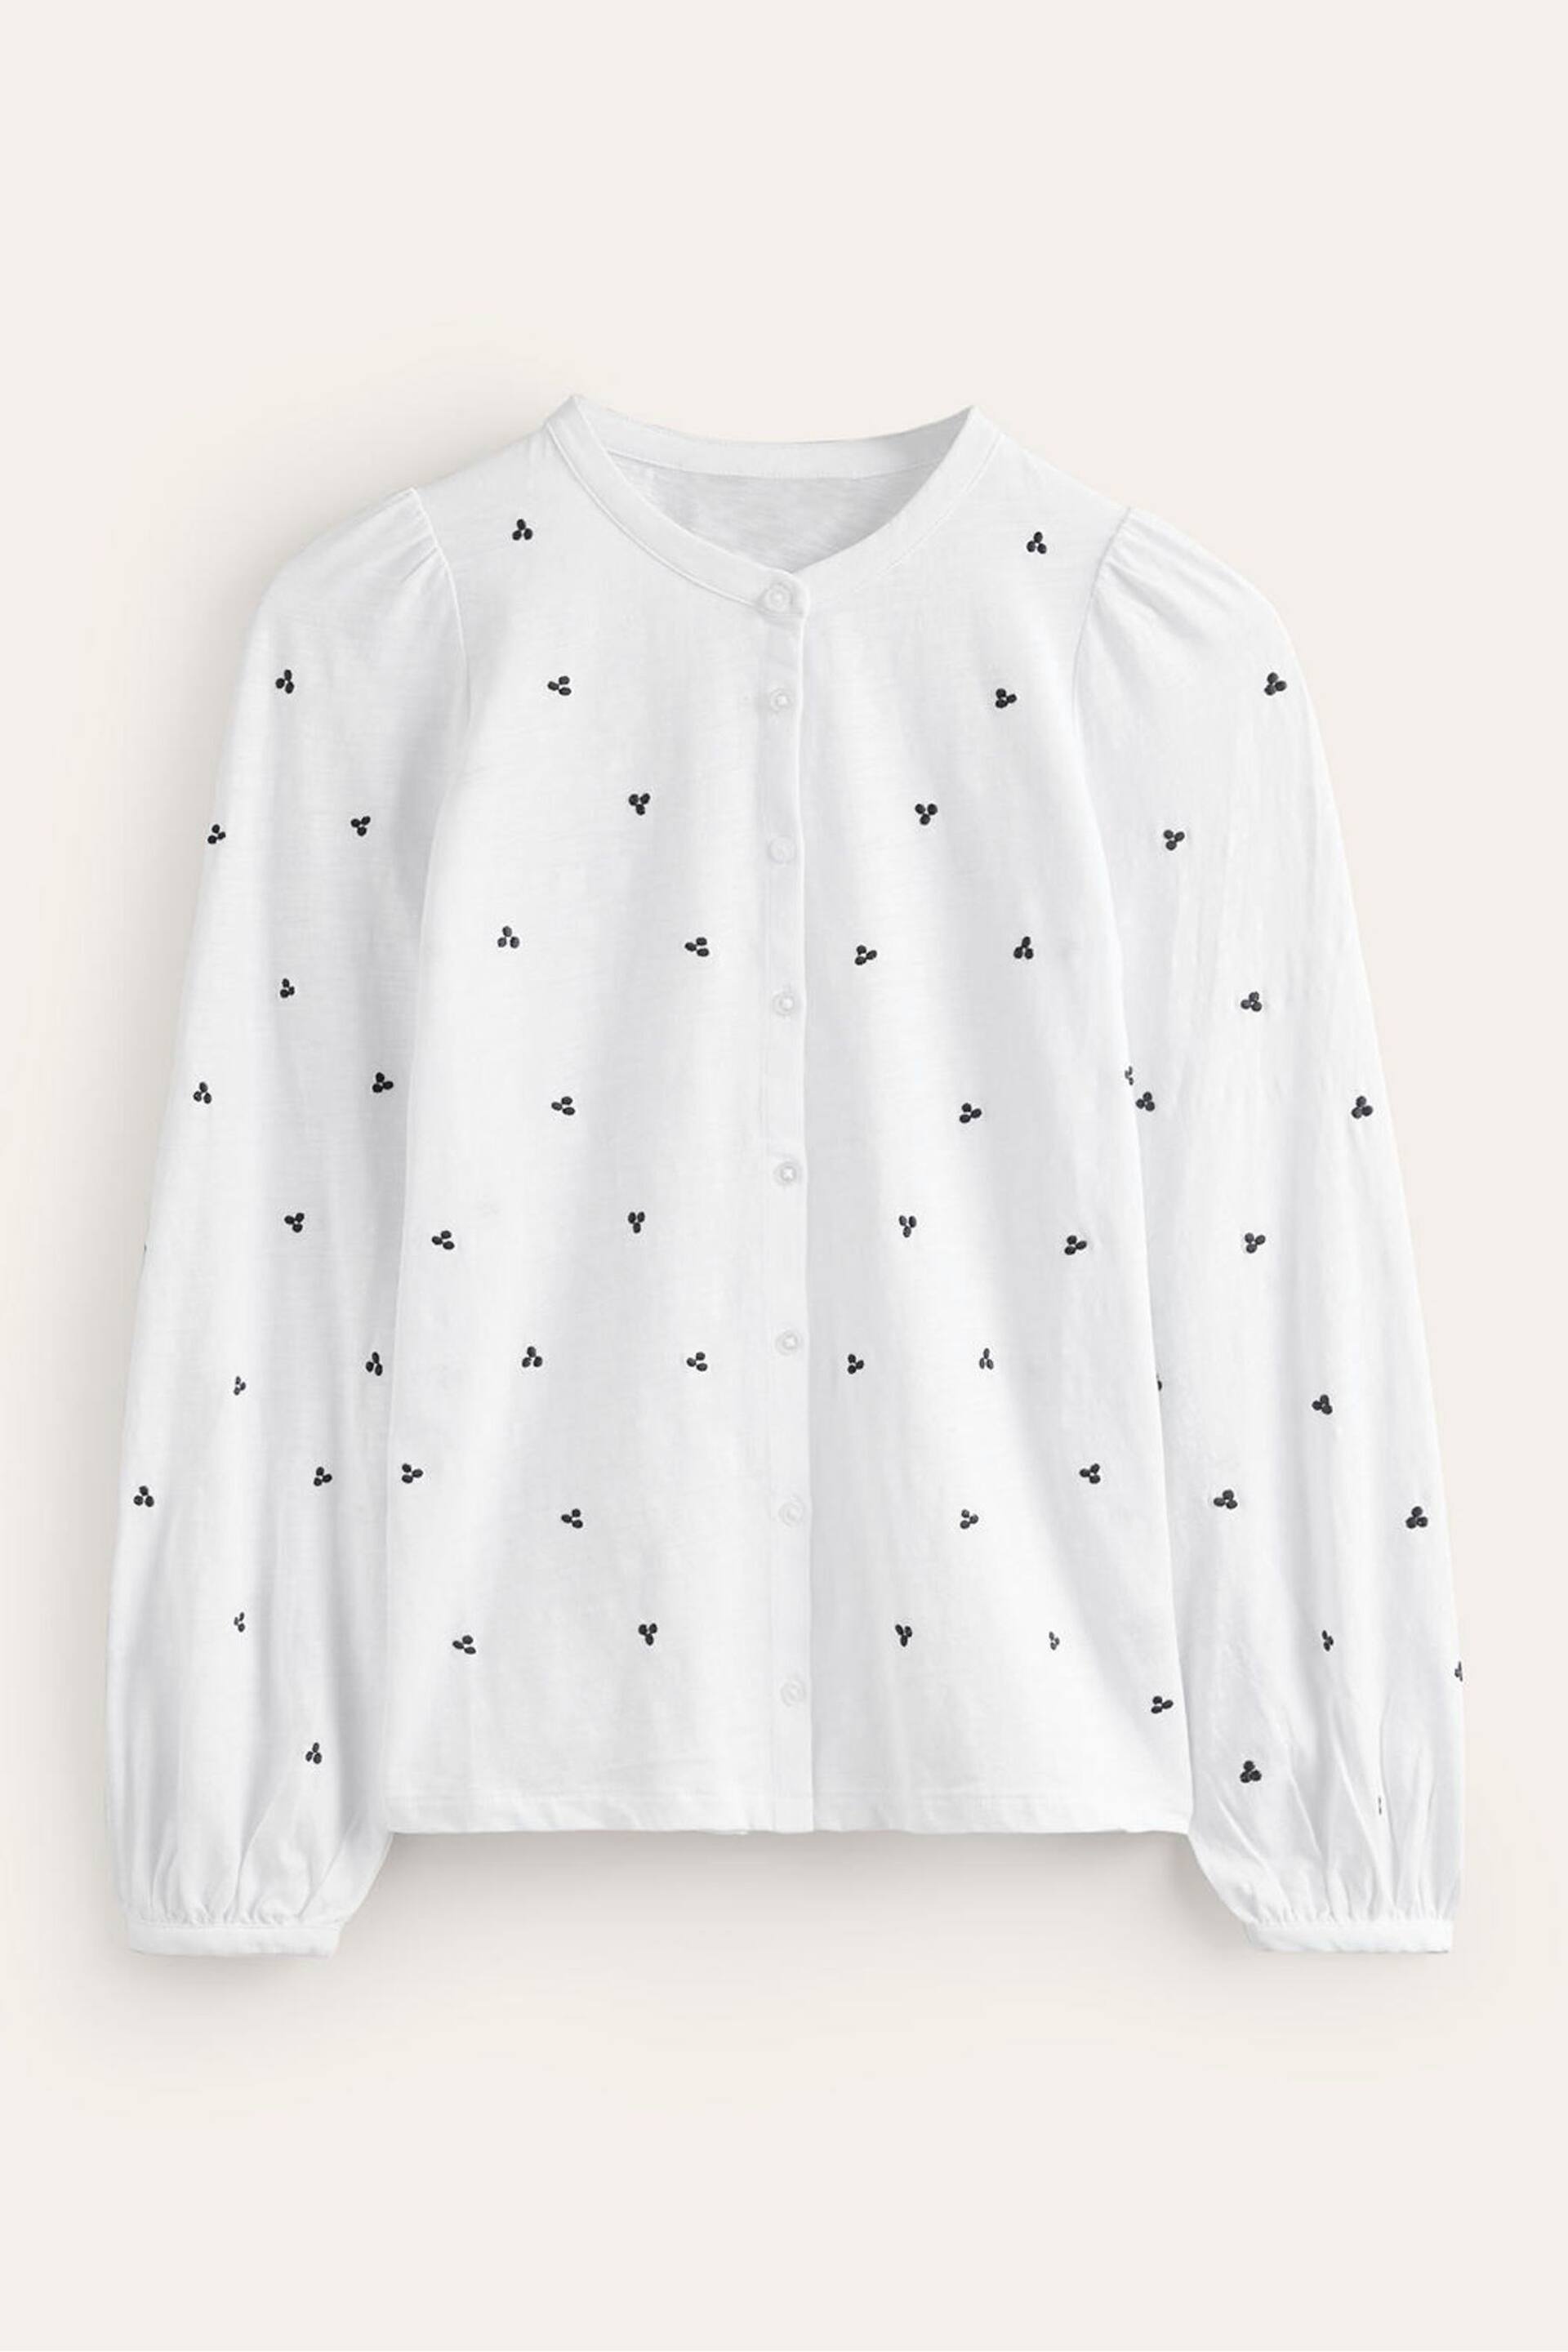 Boden White Marina Embroidered Shirt - Image 5 of 5